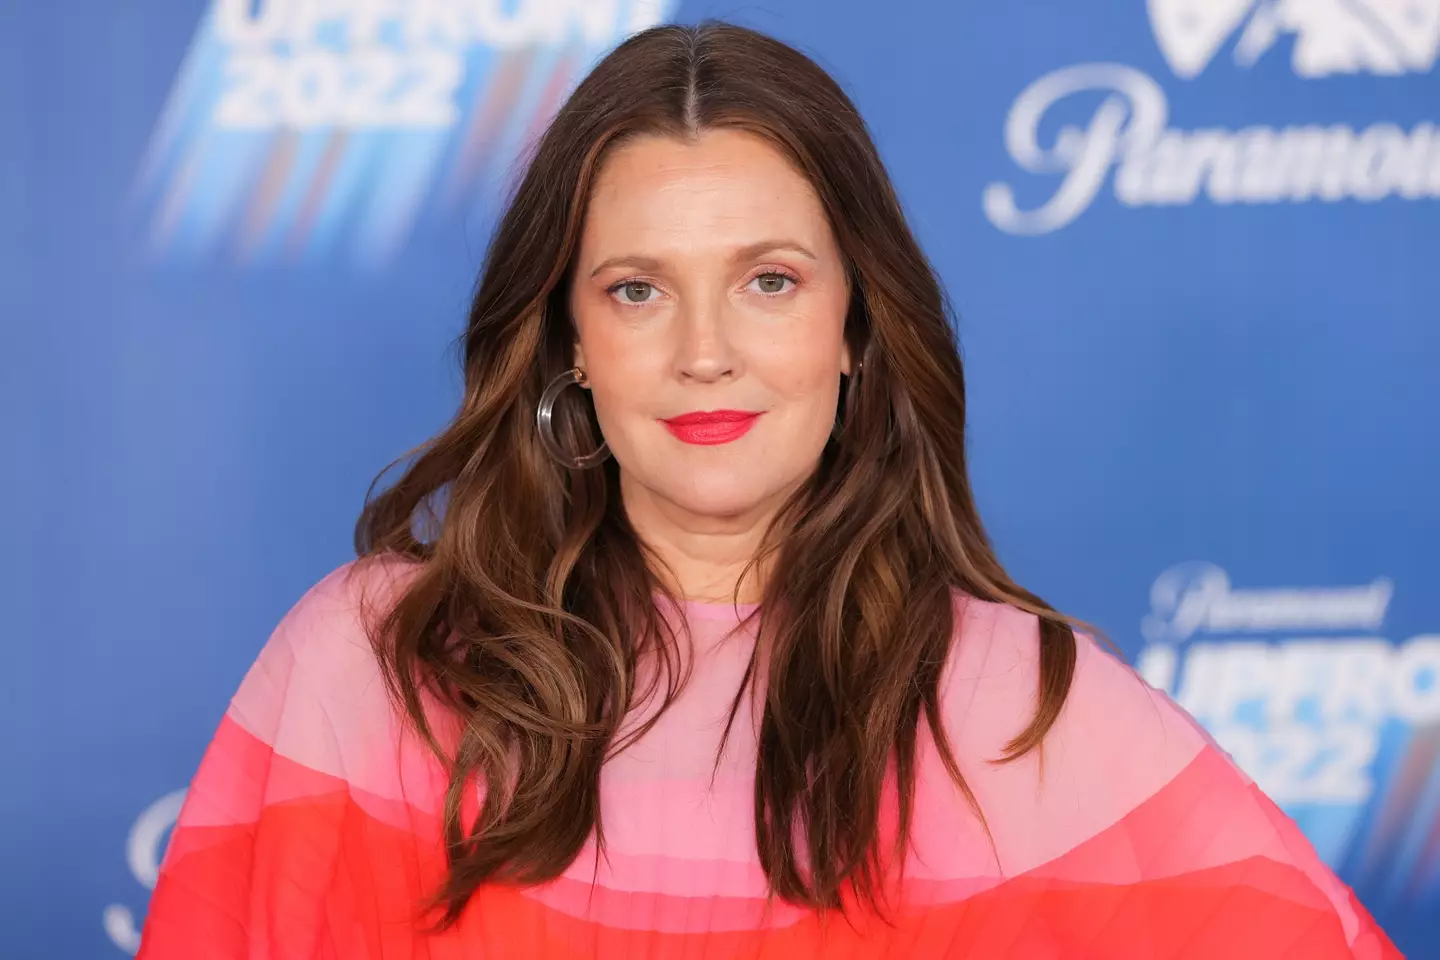 Drew Barrymore previously admitted she wasn't ready for a relationship.